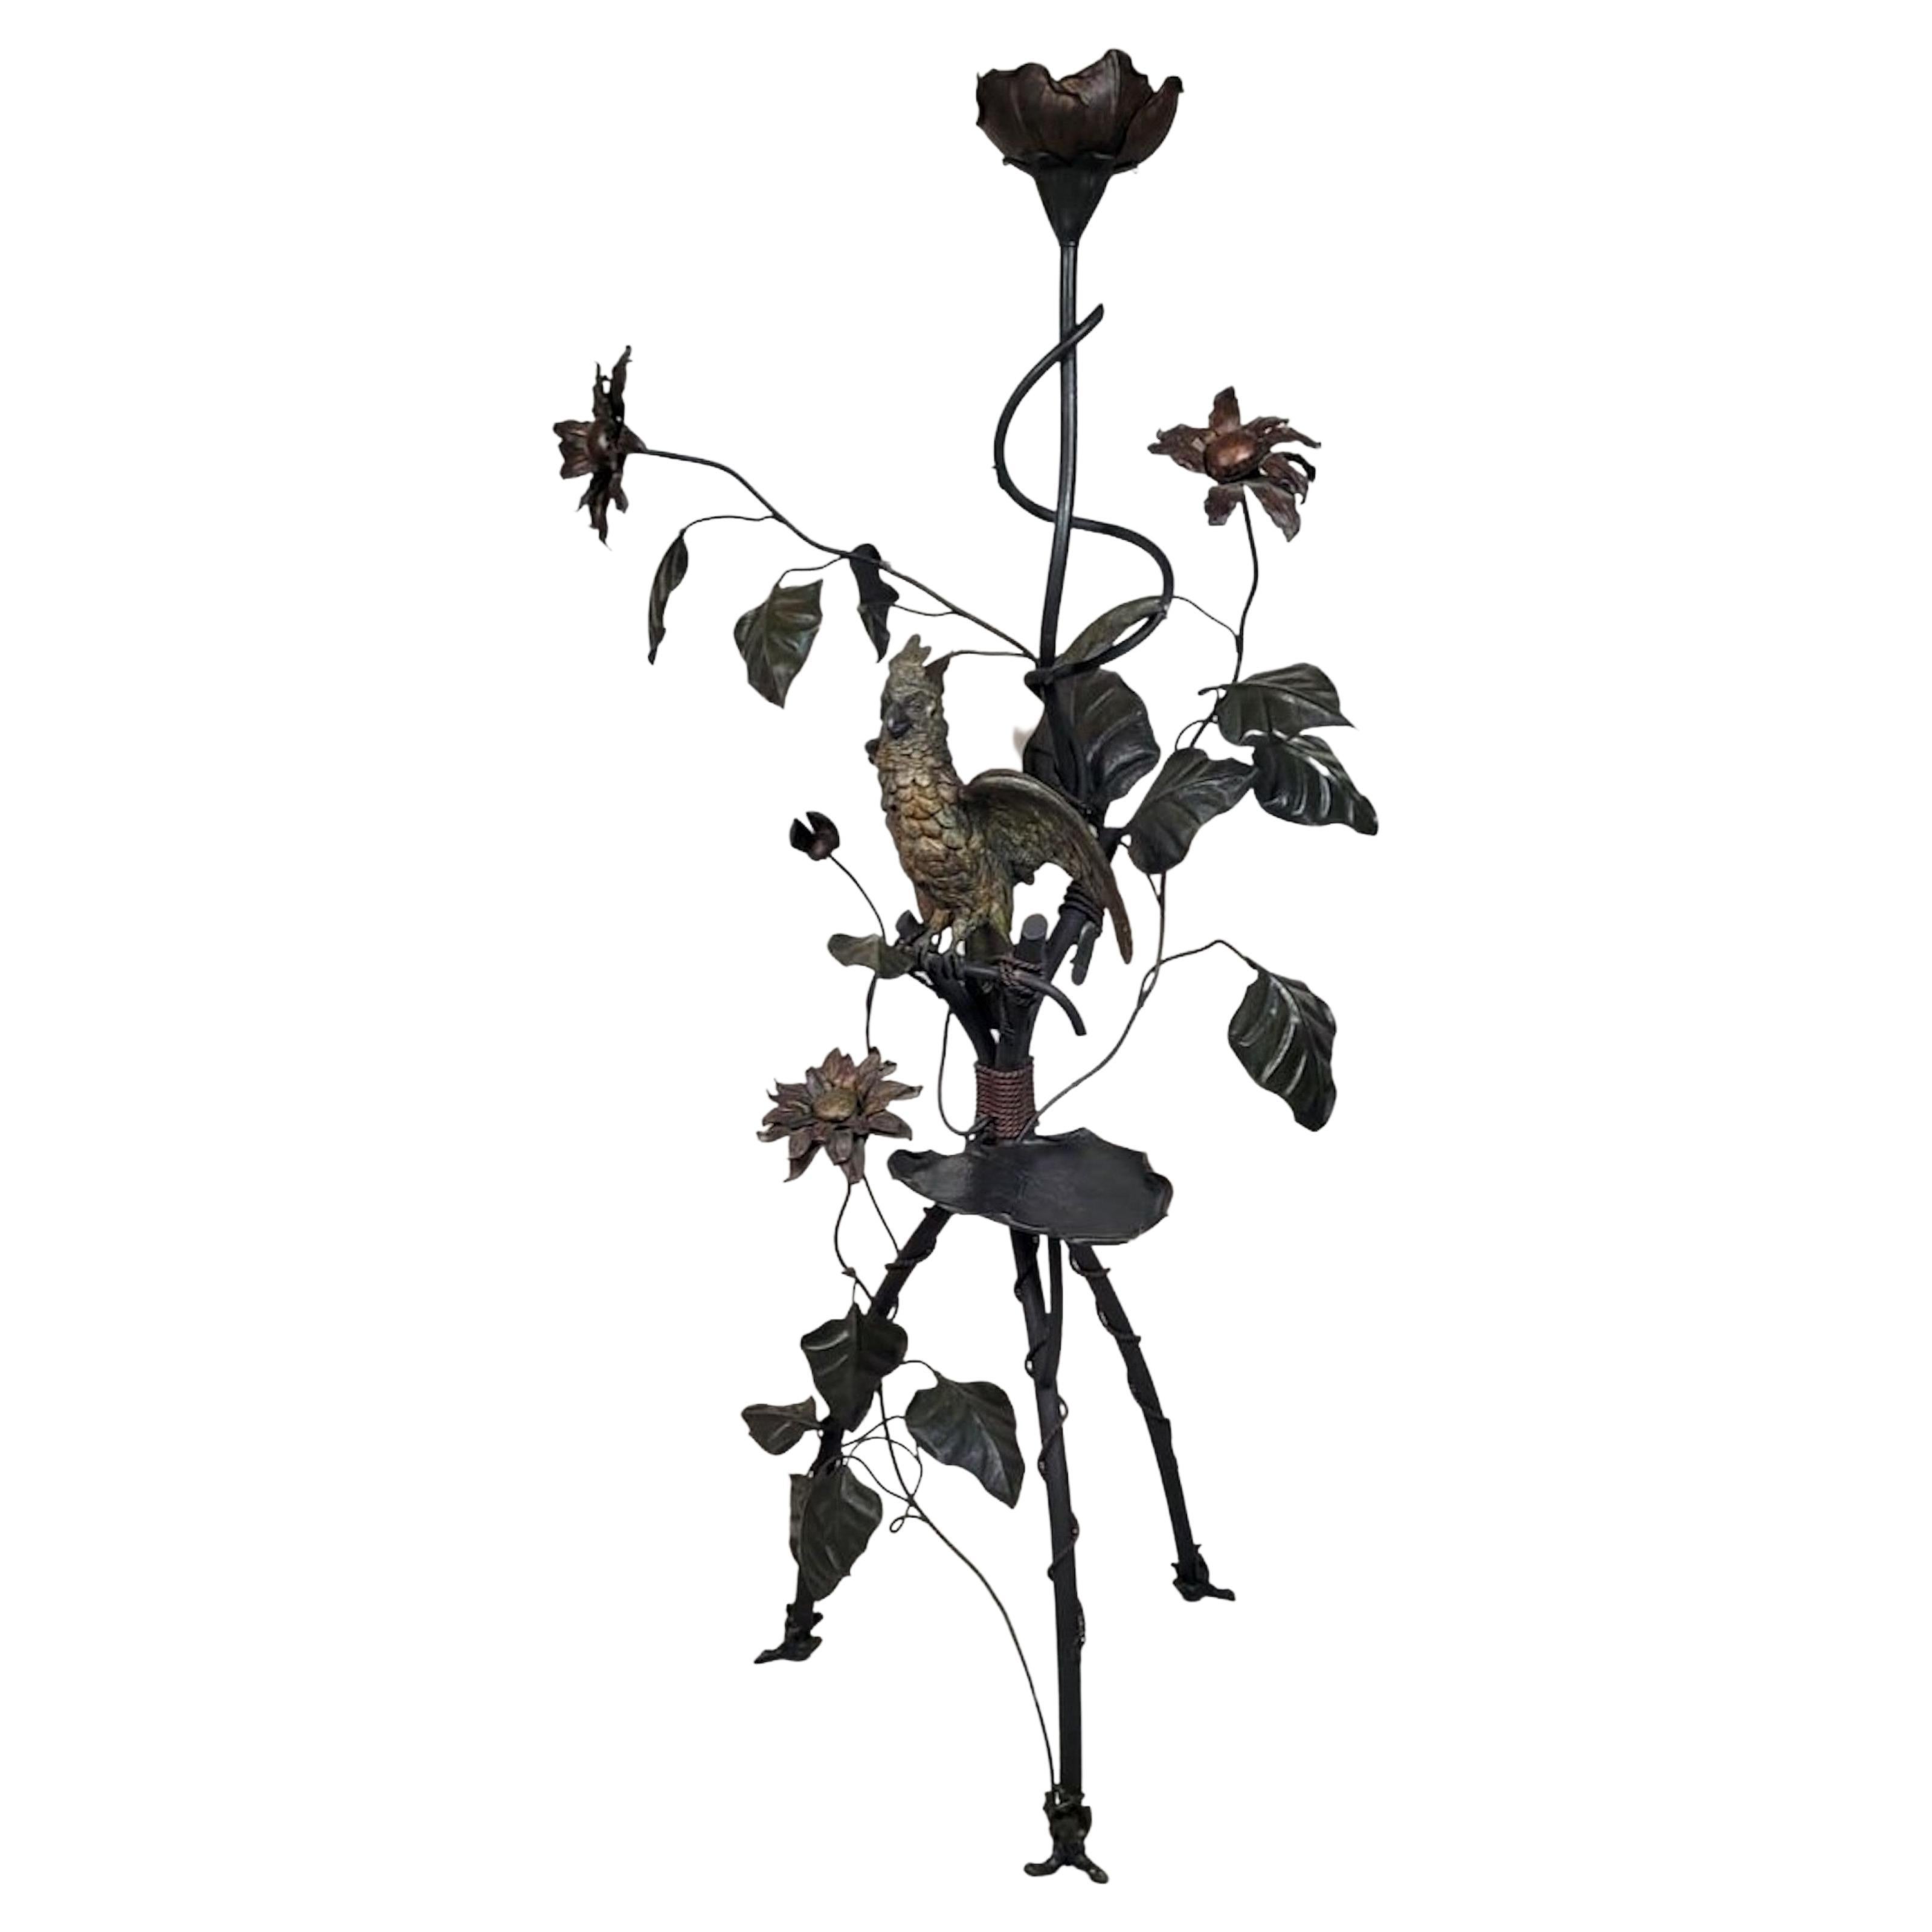 Wrought Iron Floor Lamp - Decorations With Leaves, Flowers, And Parrot For Sale